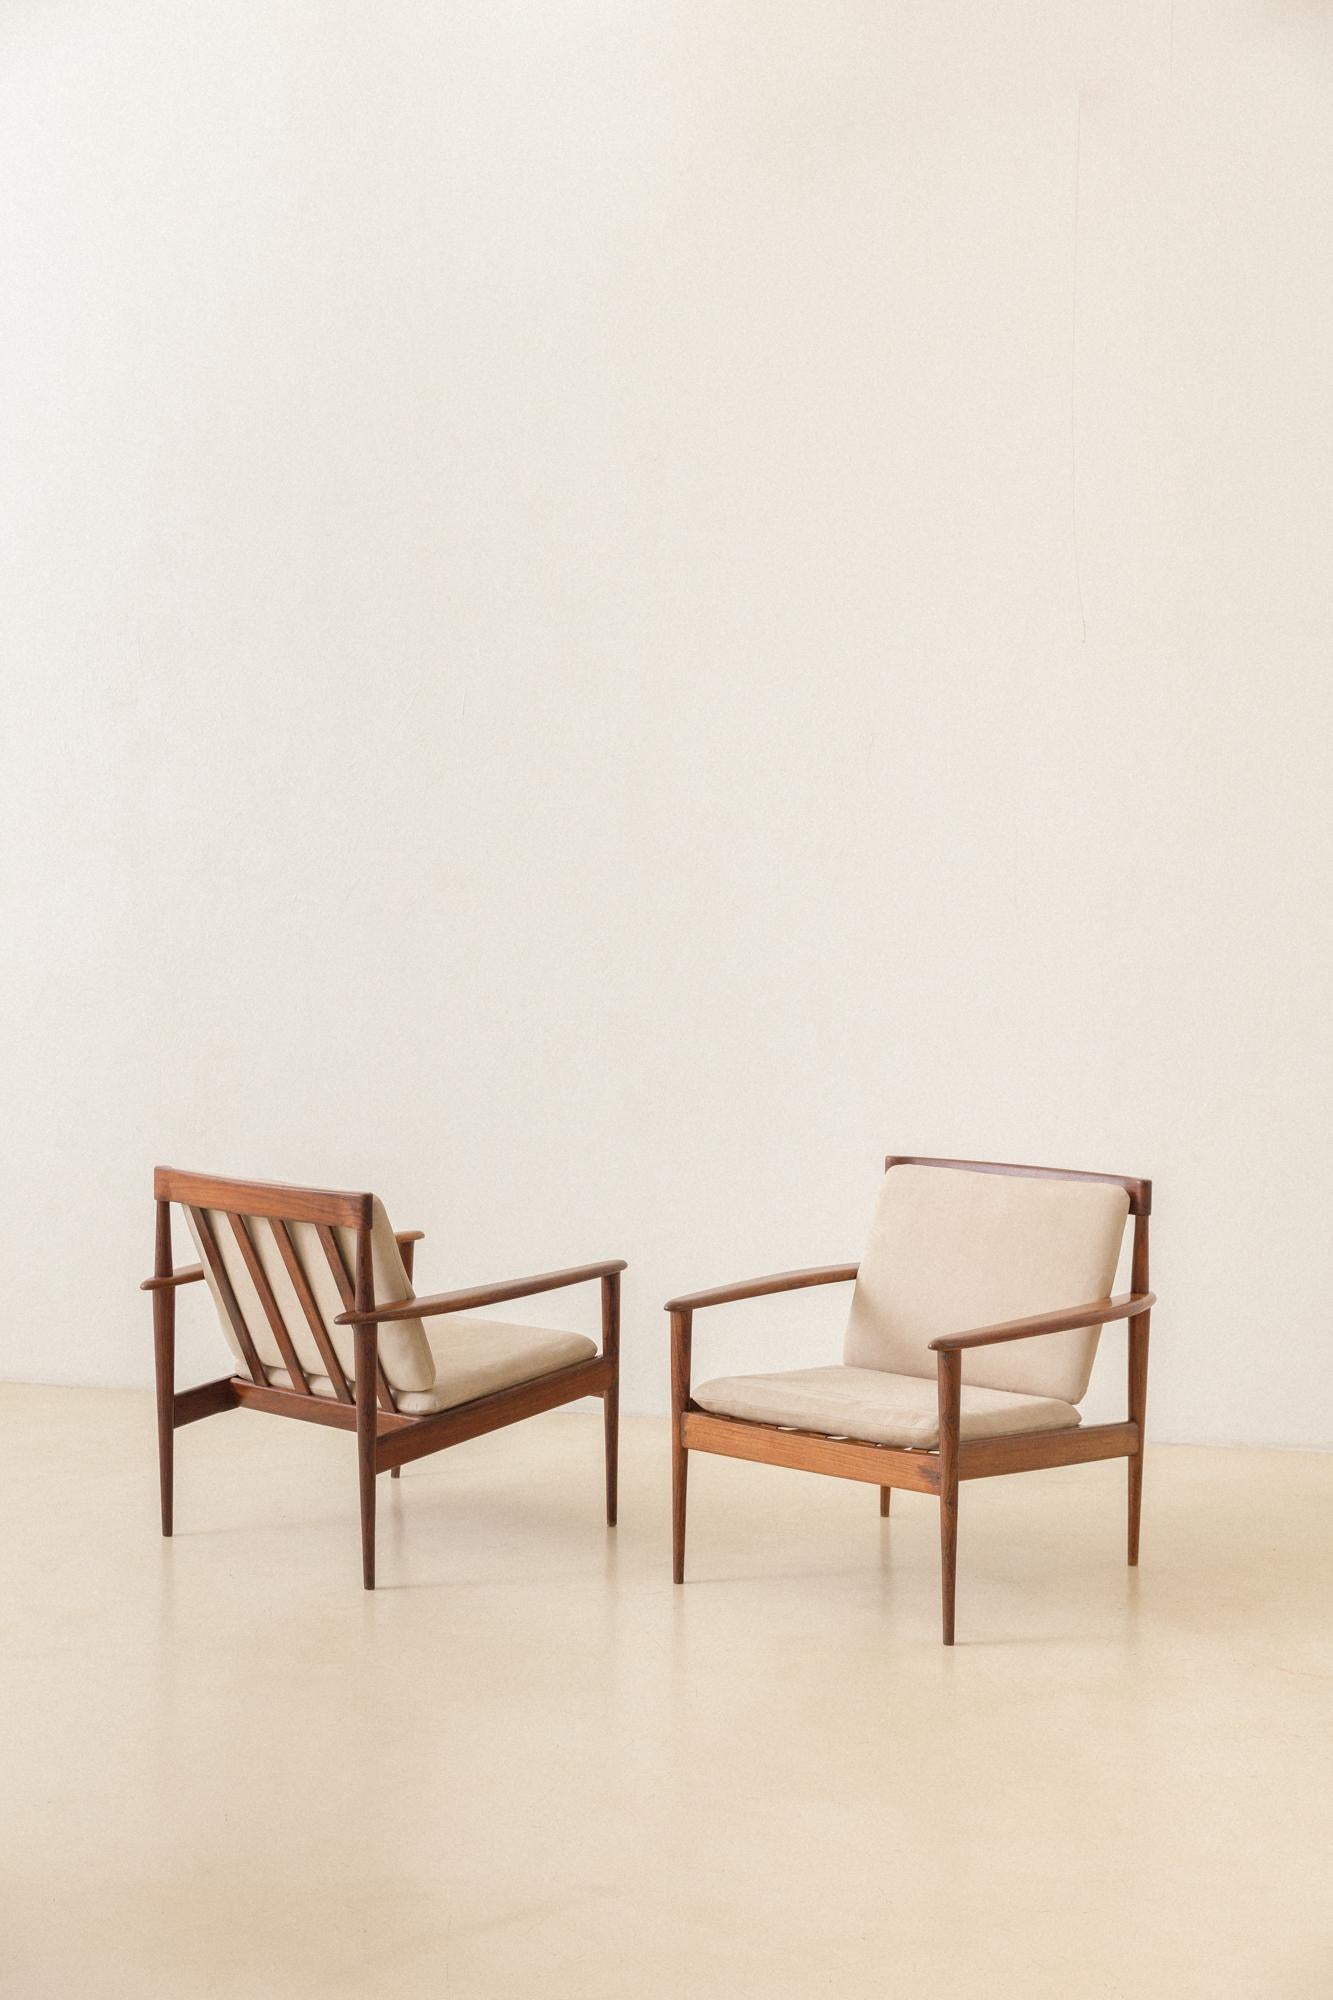 Pair of Armchairs by Grete Jalk/Rino Levi, c. 1951, Brazilian Midcentury Design In Good Condition For Sale In New York, NY